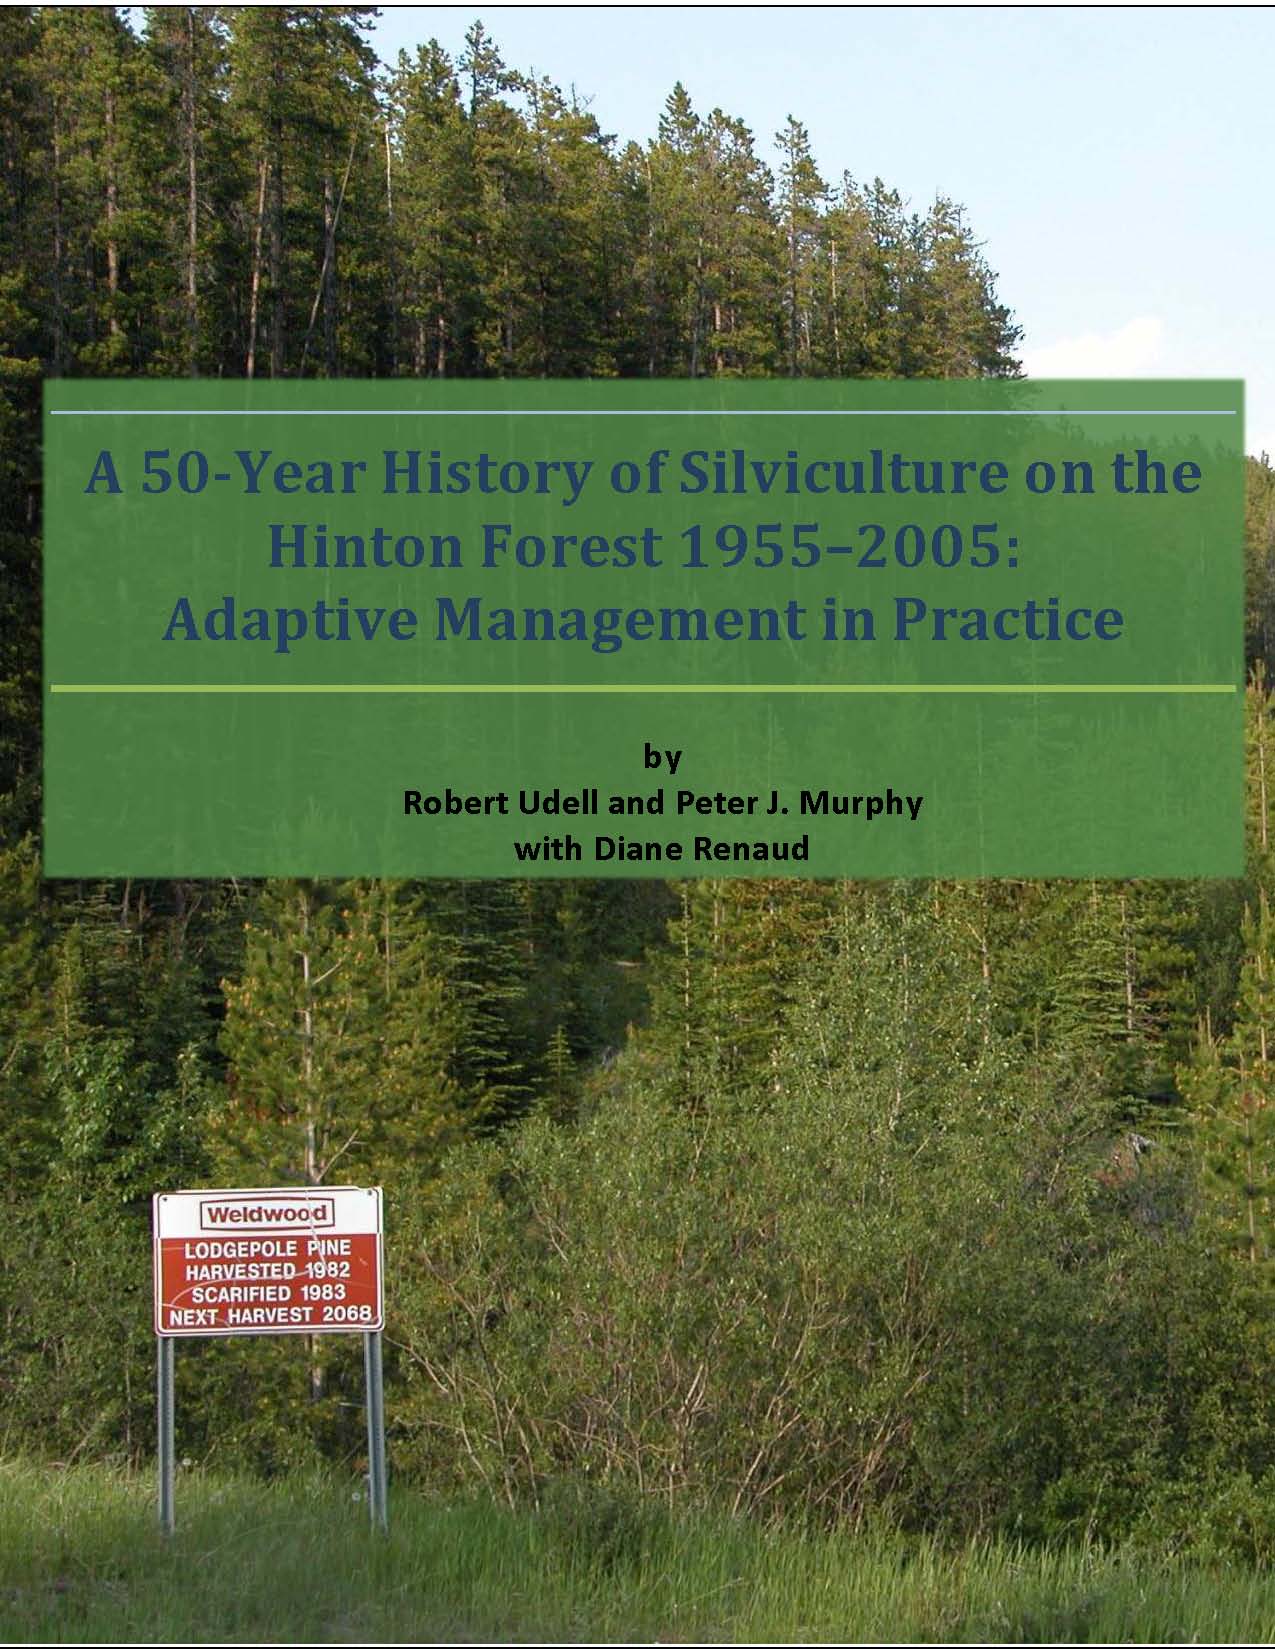 A 50-Year History of Silviculture on the Hinton Forest 1955-2005: Adaptive Management in Practice